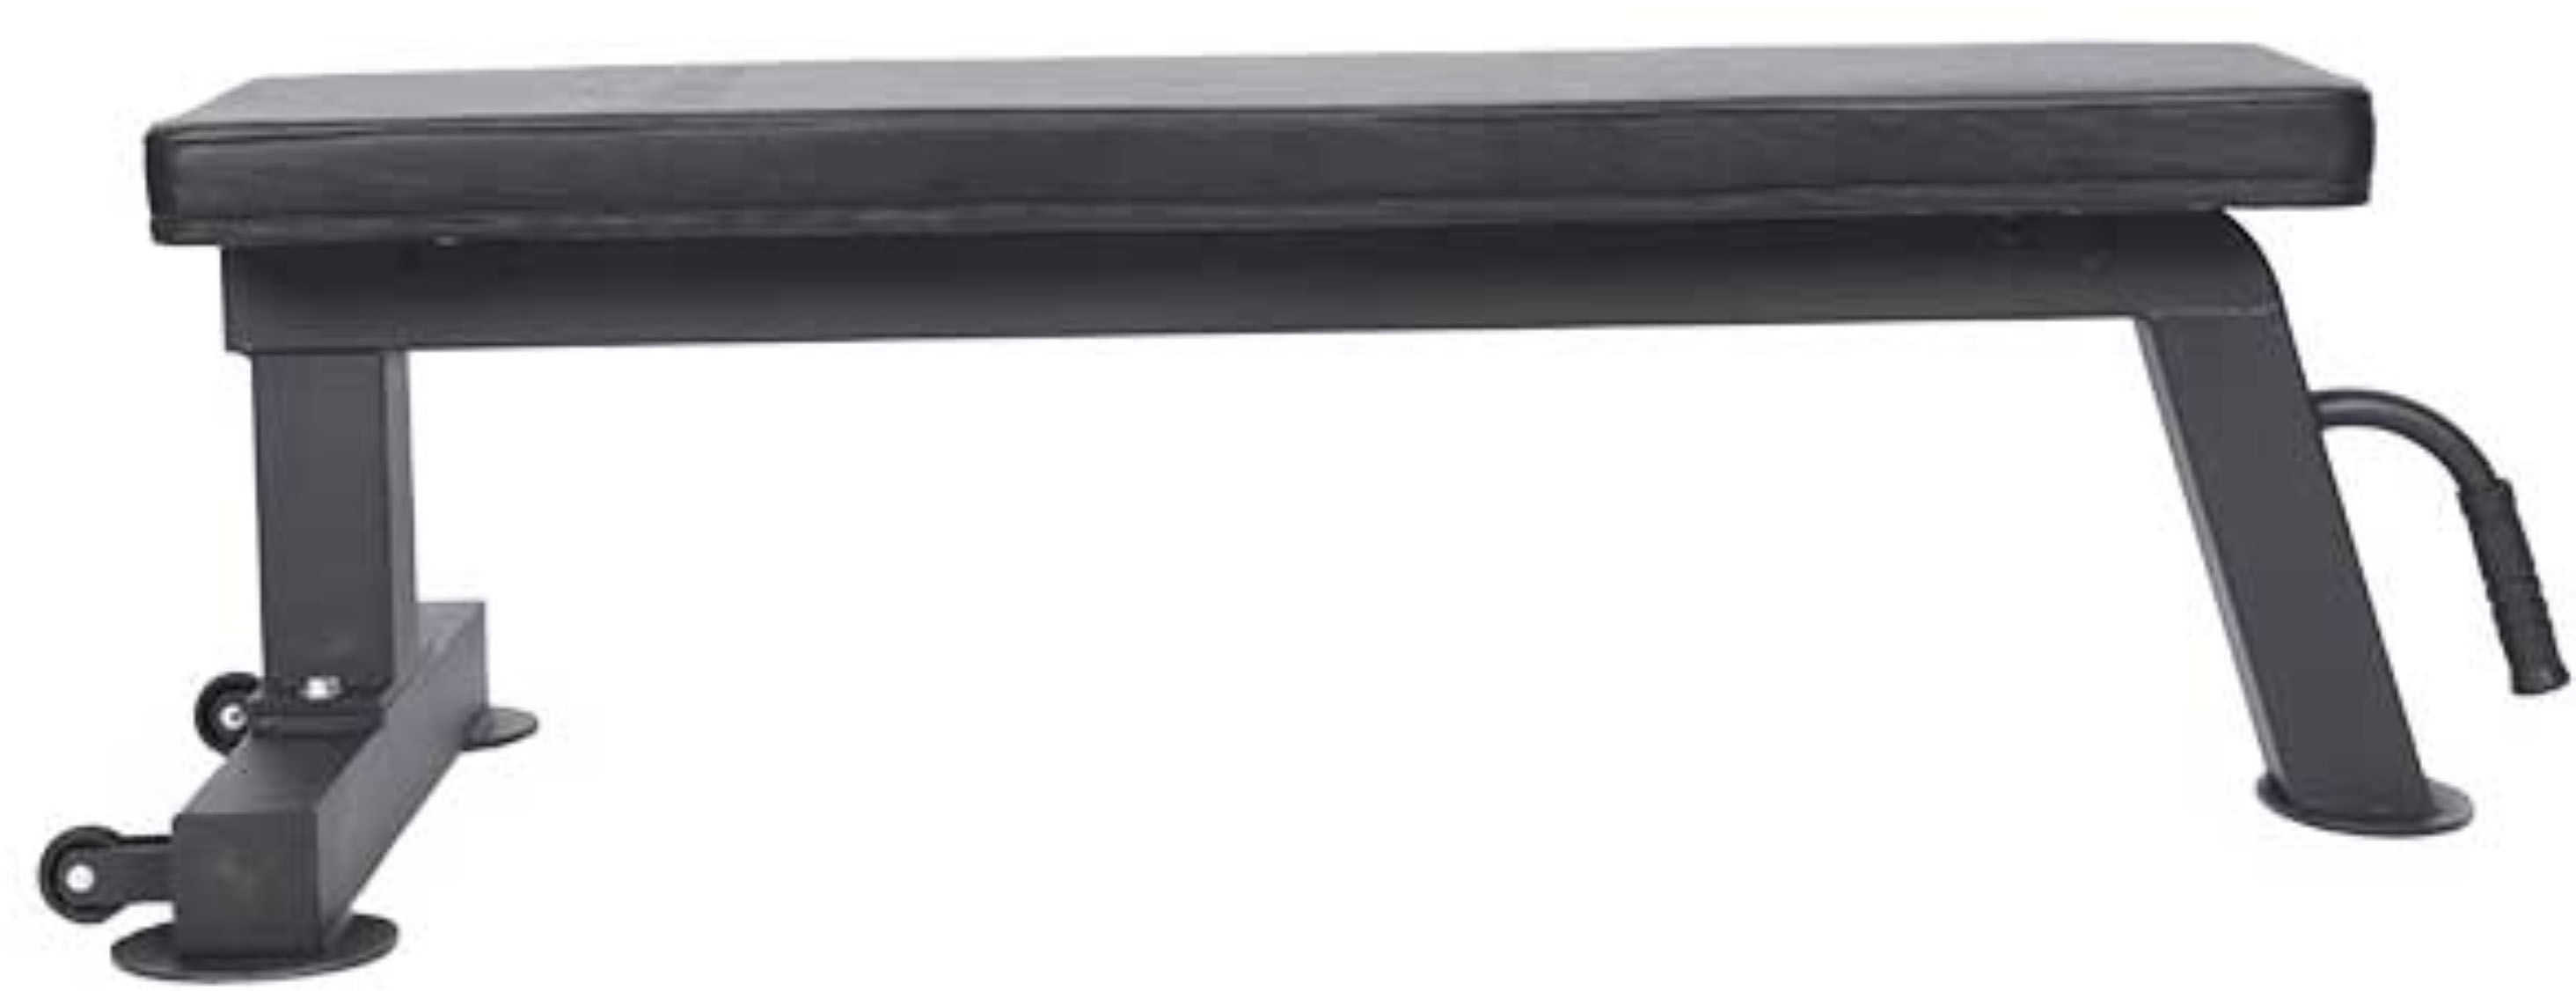 Angle View: Stack Fitness - Stack Heavy Duty Flat Bench - Black